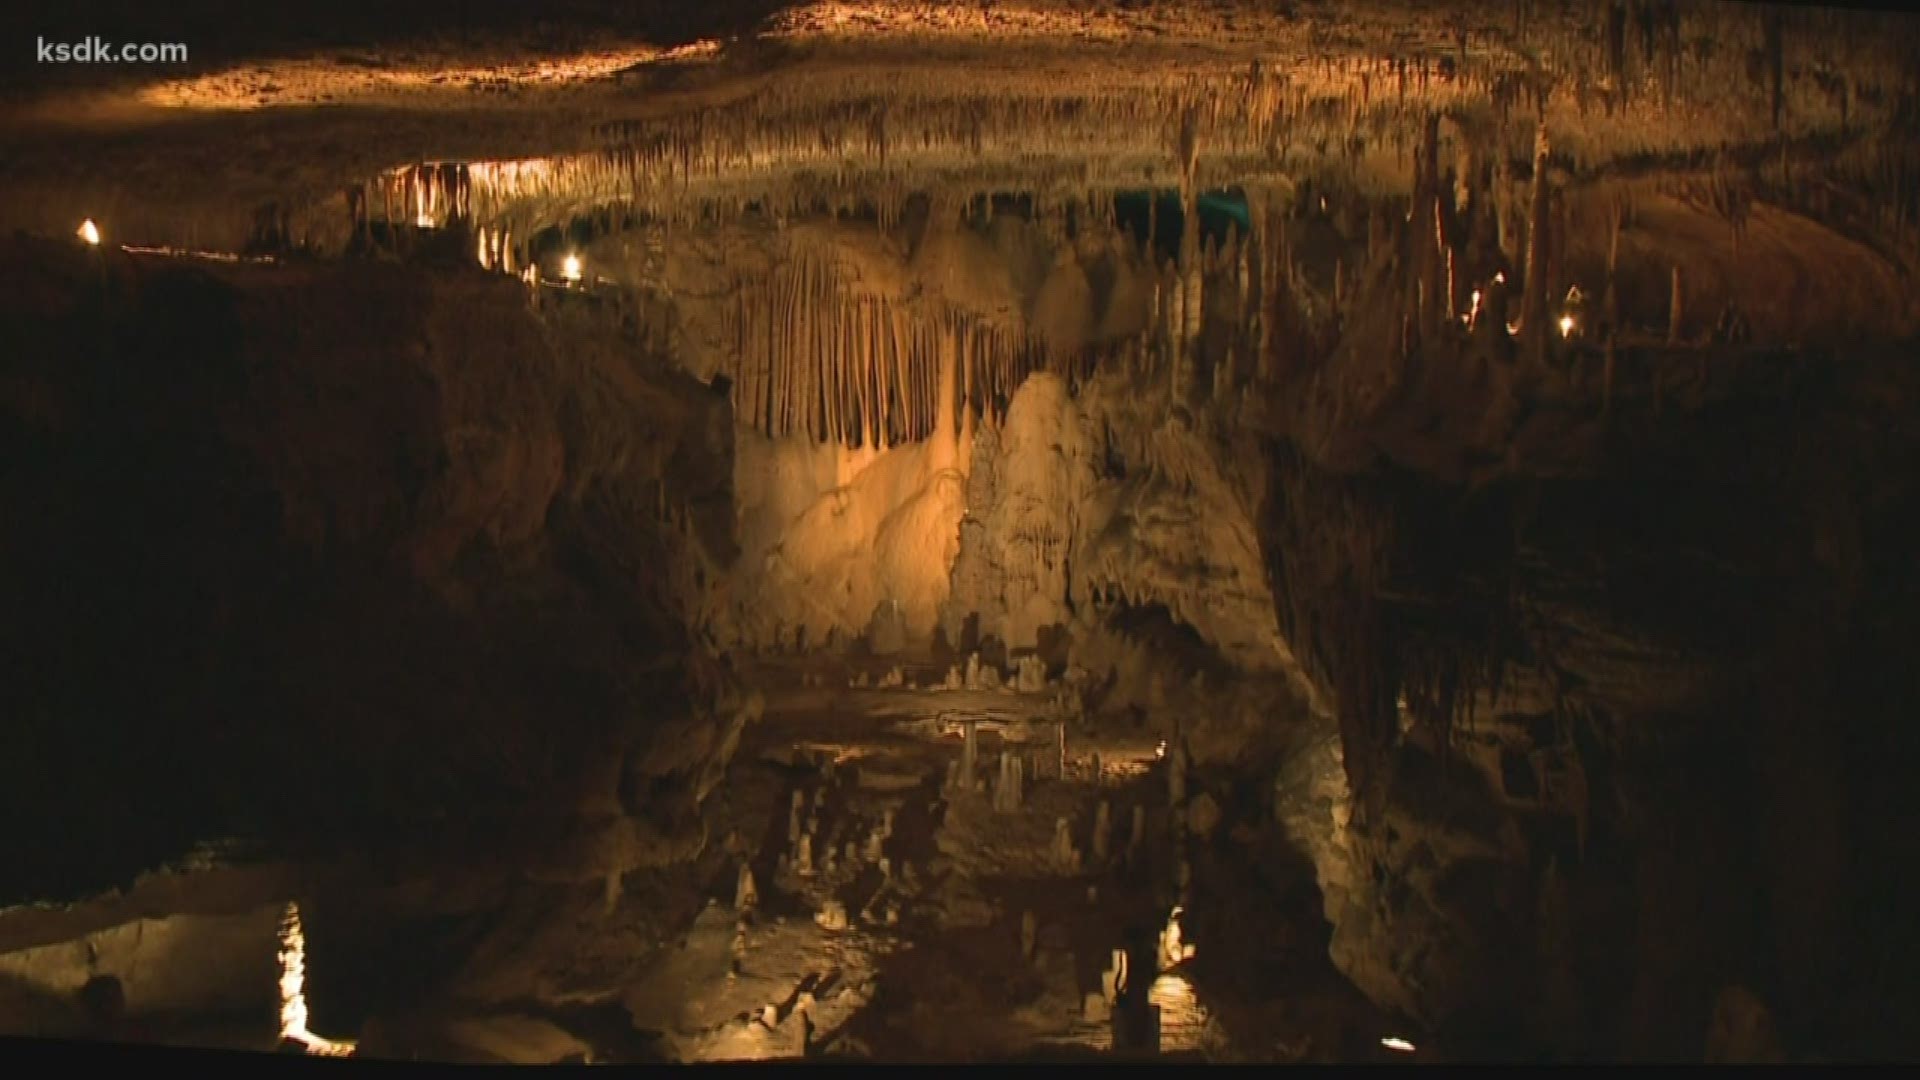 Courtney continues her Indiana adventures by checking out some really cool, 50 degrees all year, caves.